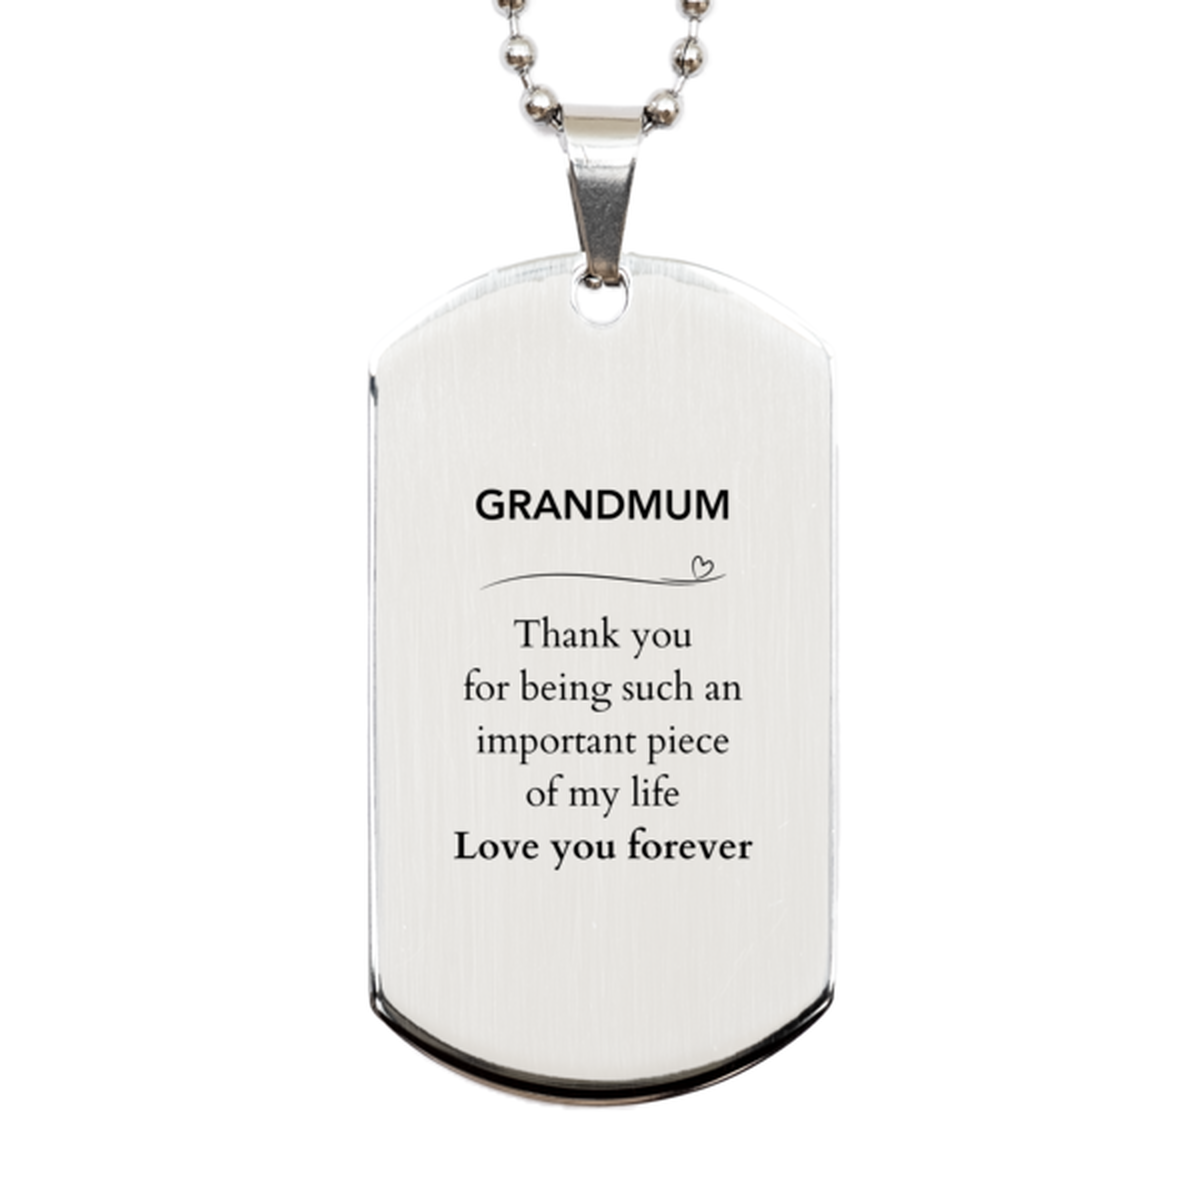 Appropriate Grandmum Silver Dog Tag Epic Birthday Gifts for Grandmum Thank you for being such an important piece of my life Grandmum Christmas Mothers Fathers Day